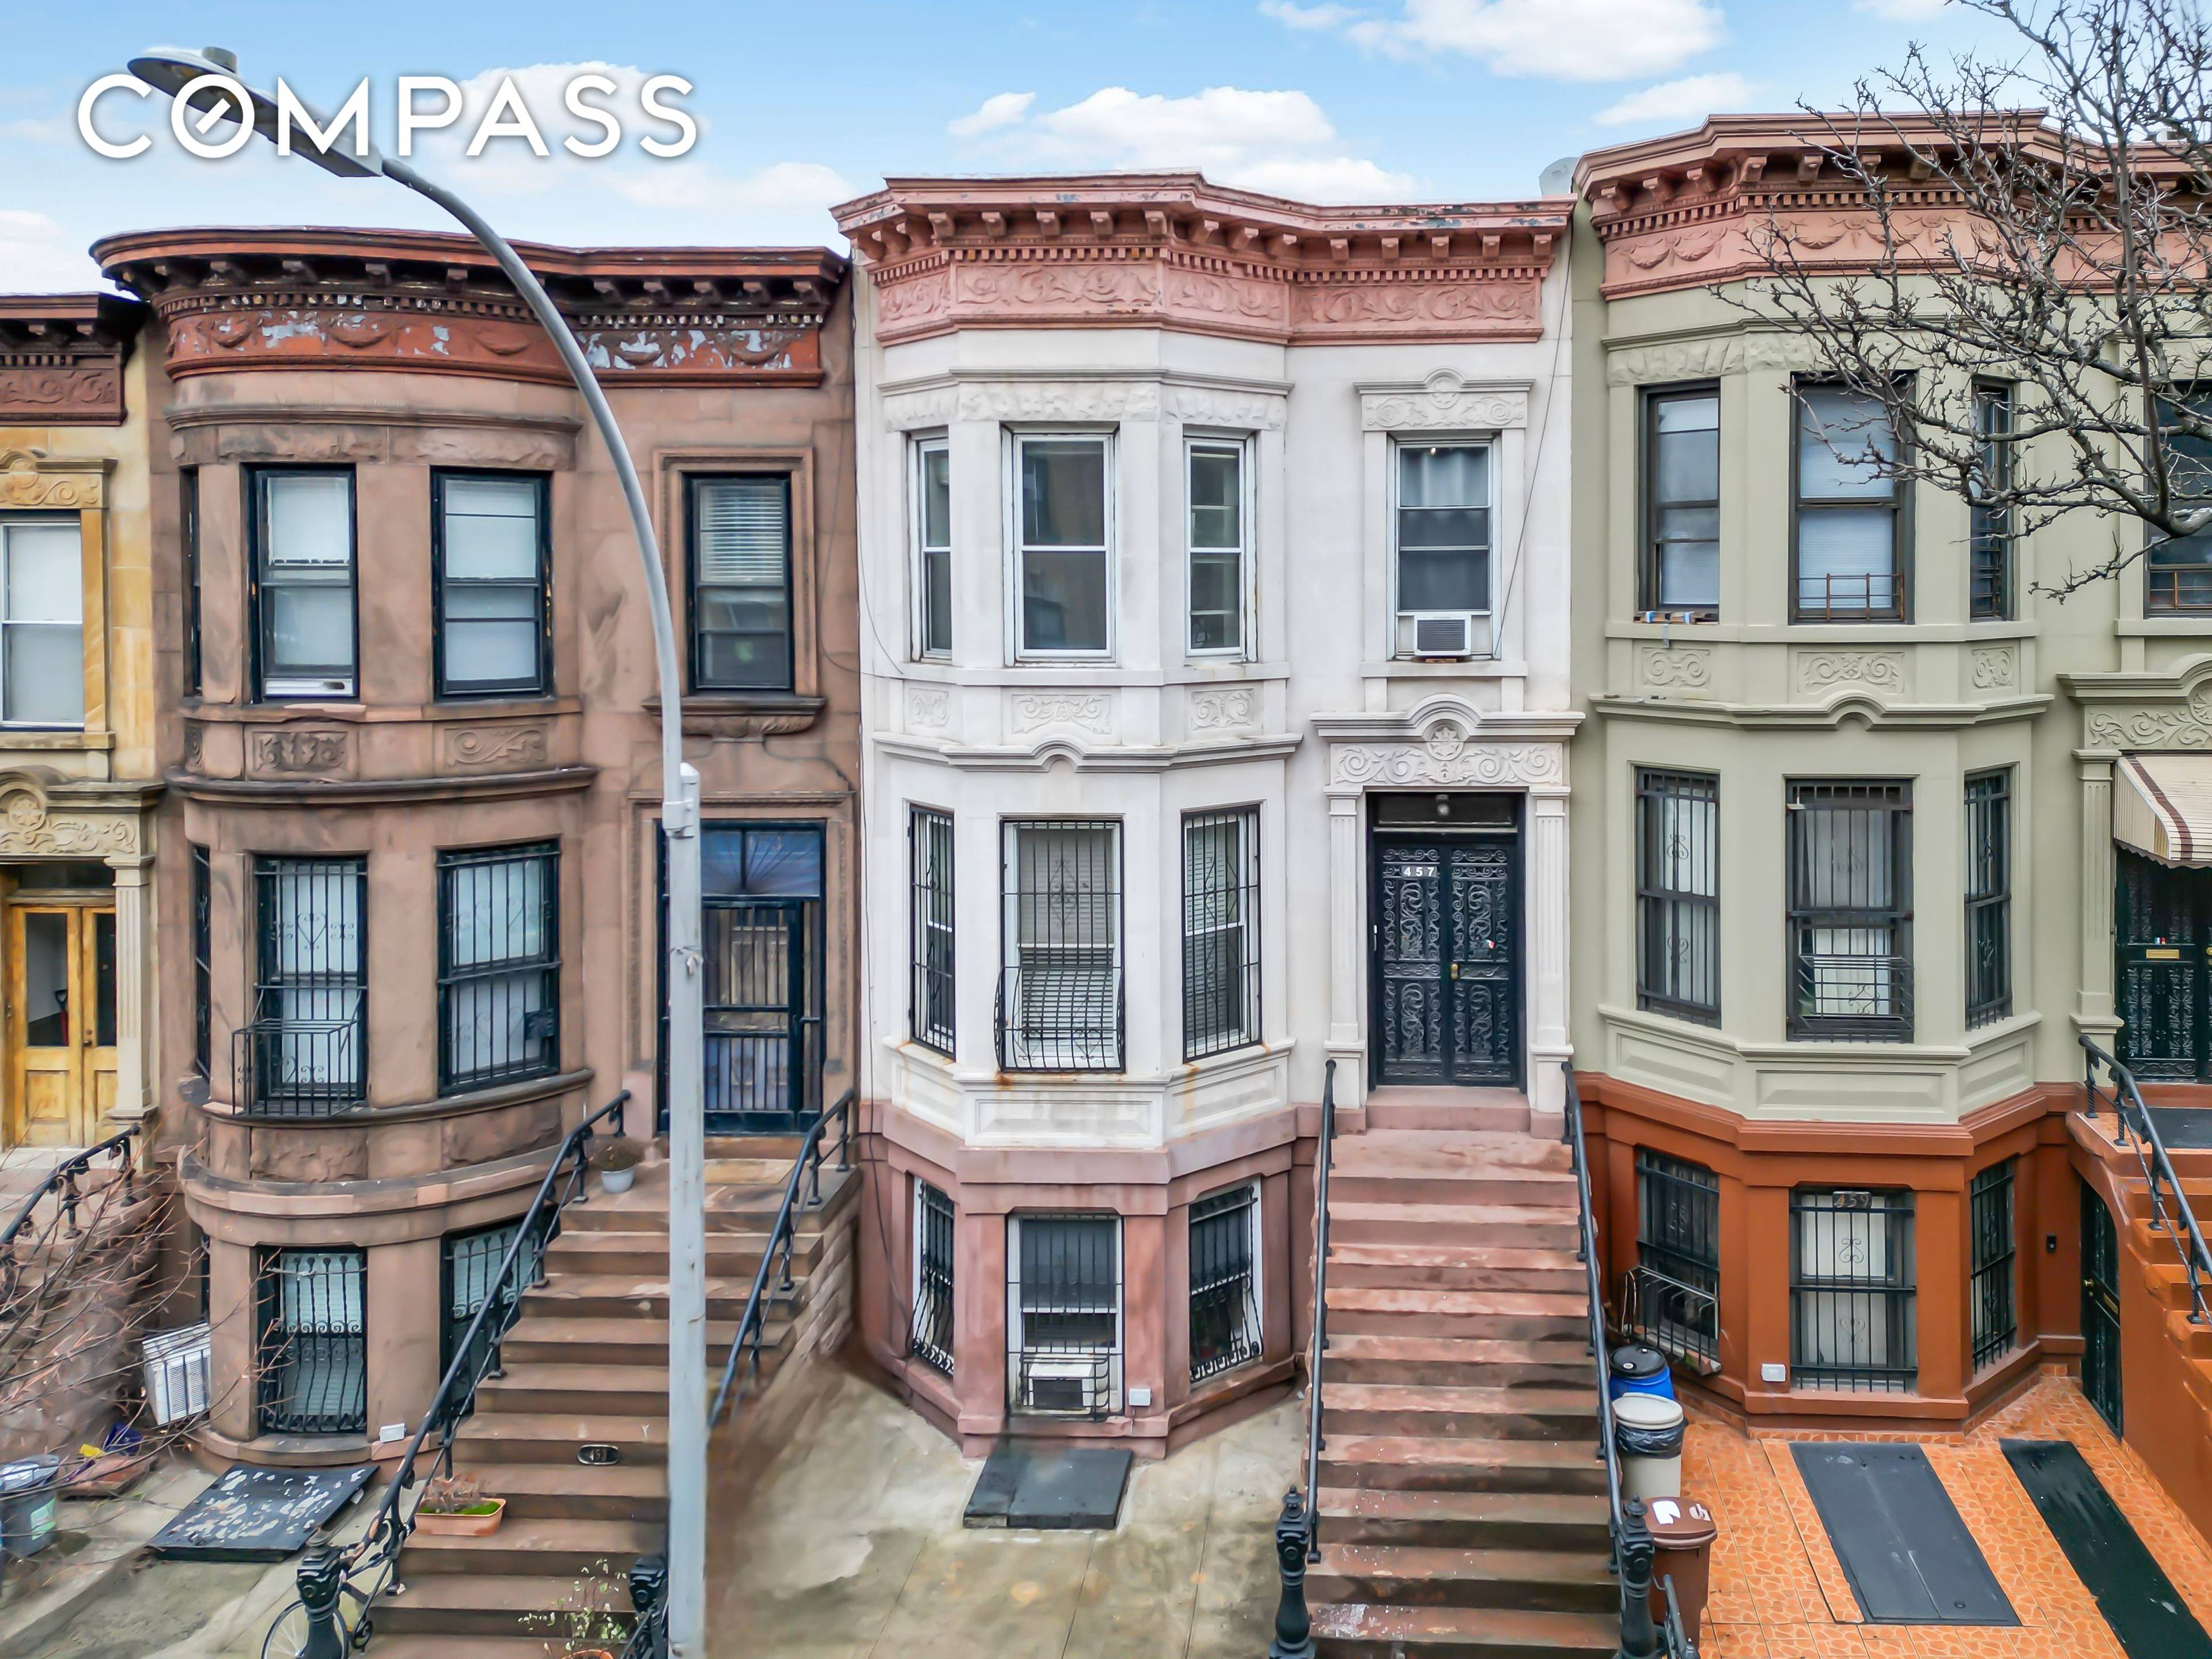 Welcome to 457 41st Street, a fantastic 3 family brownstone nestled in the vibrant neighborhood of Sunset Park, Brooklyn.